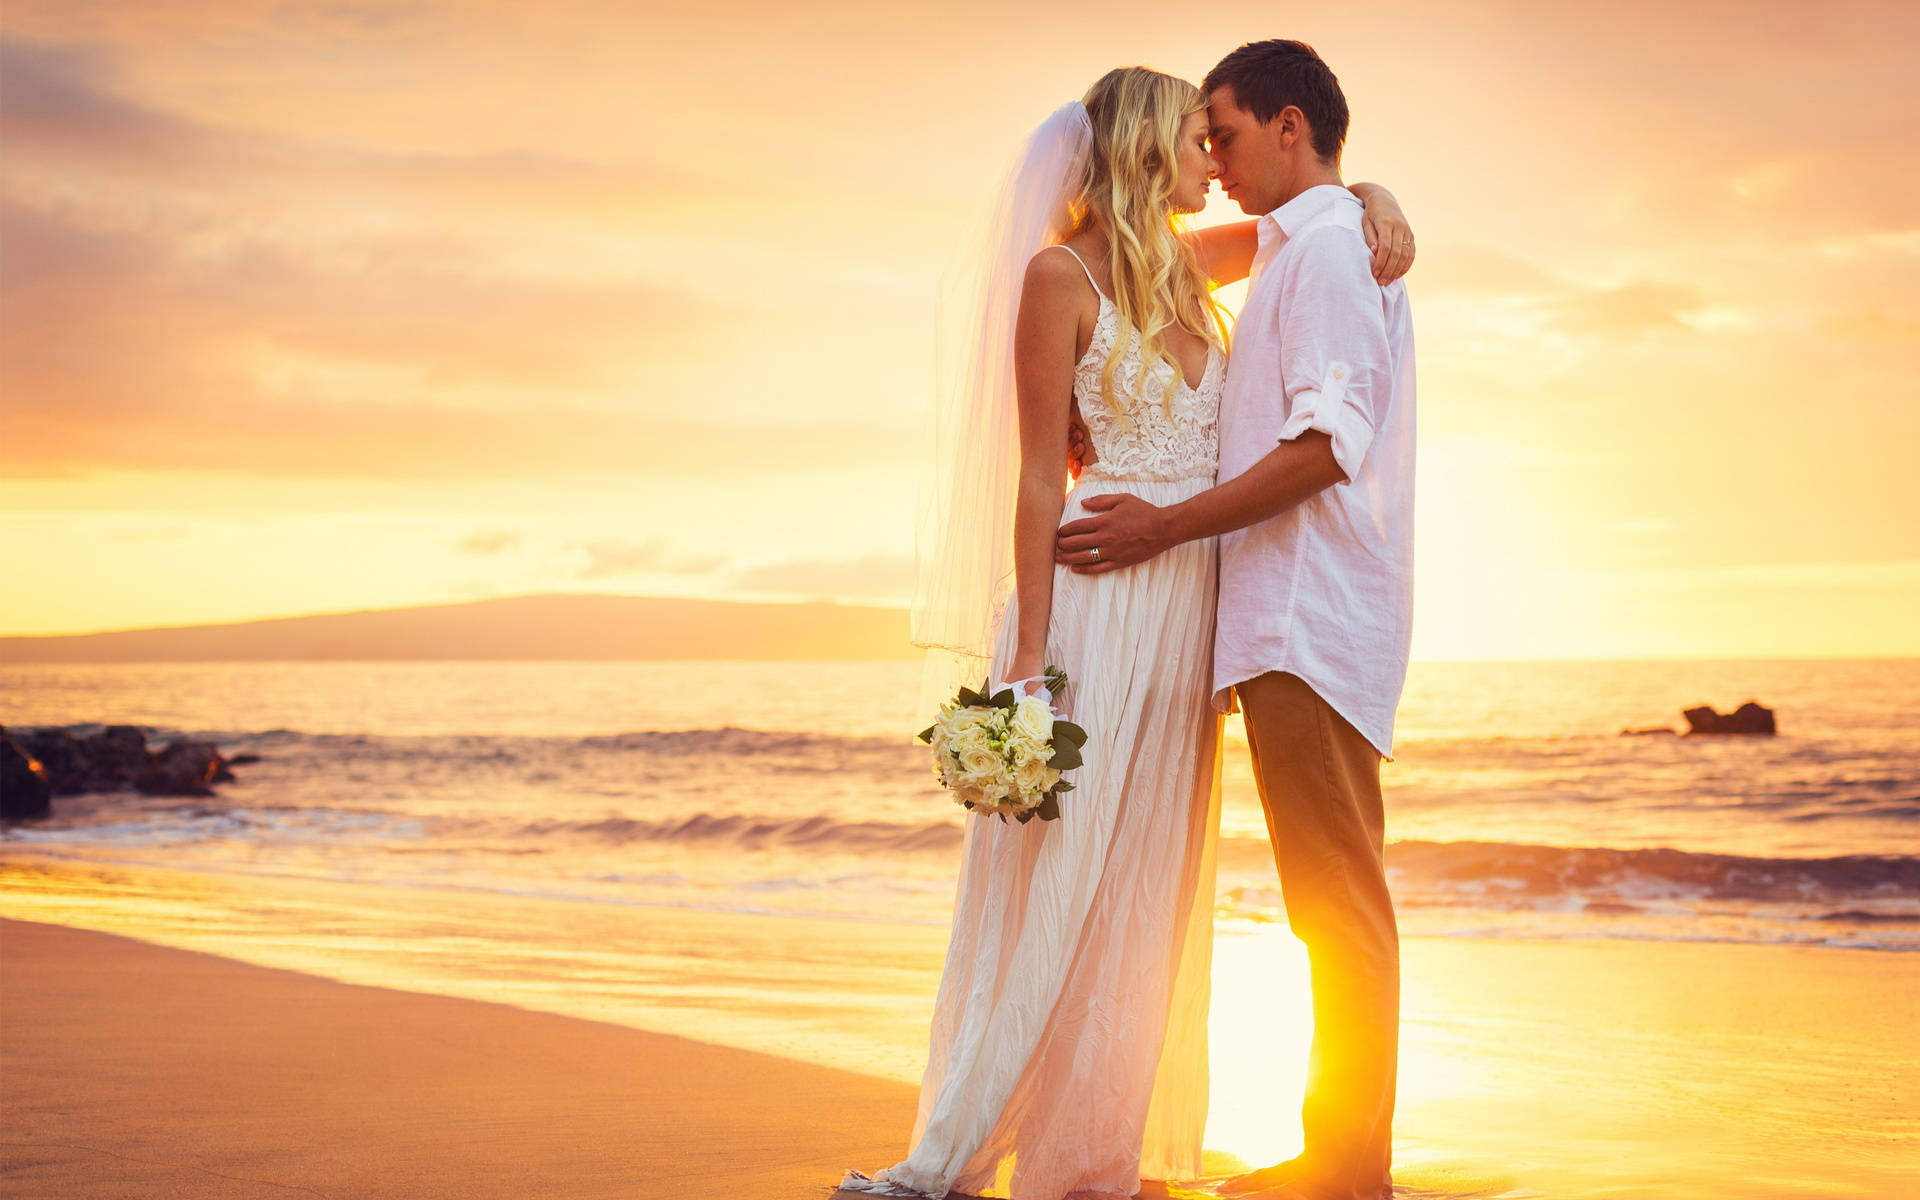 Groom With Bride In Beach Wallpaper